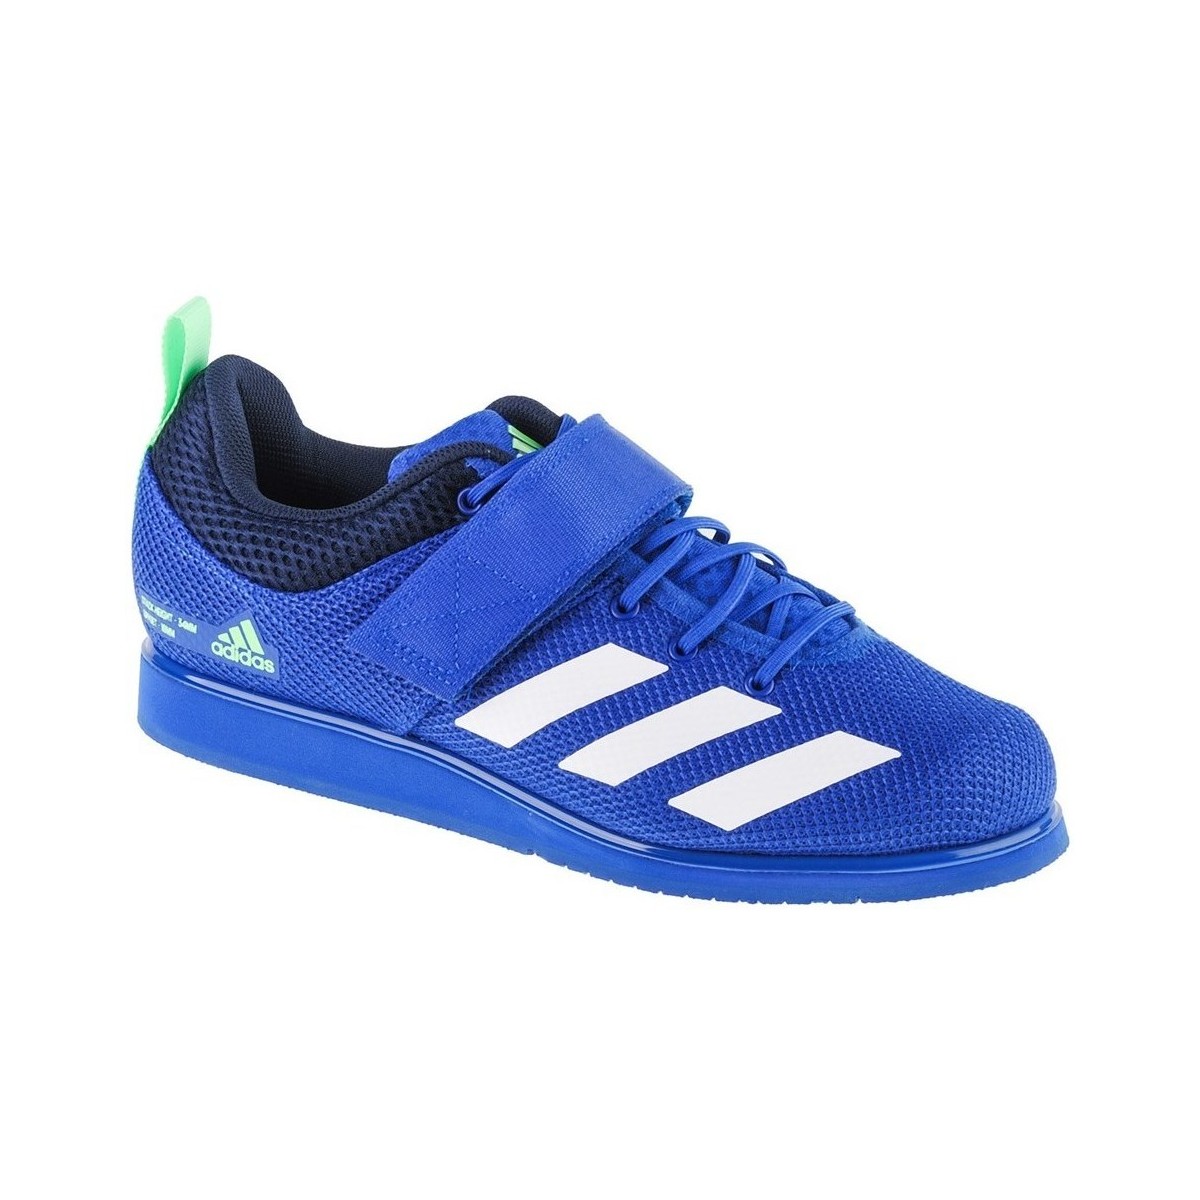 Adidas Powerlift 5 Weightlifting Blue - Trainerspotter